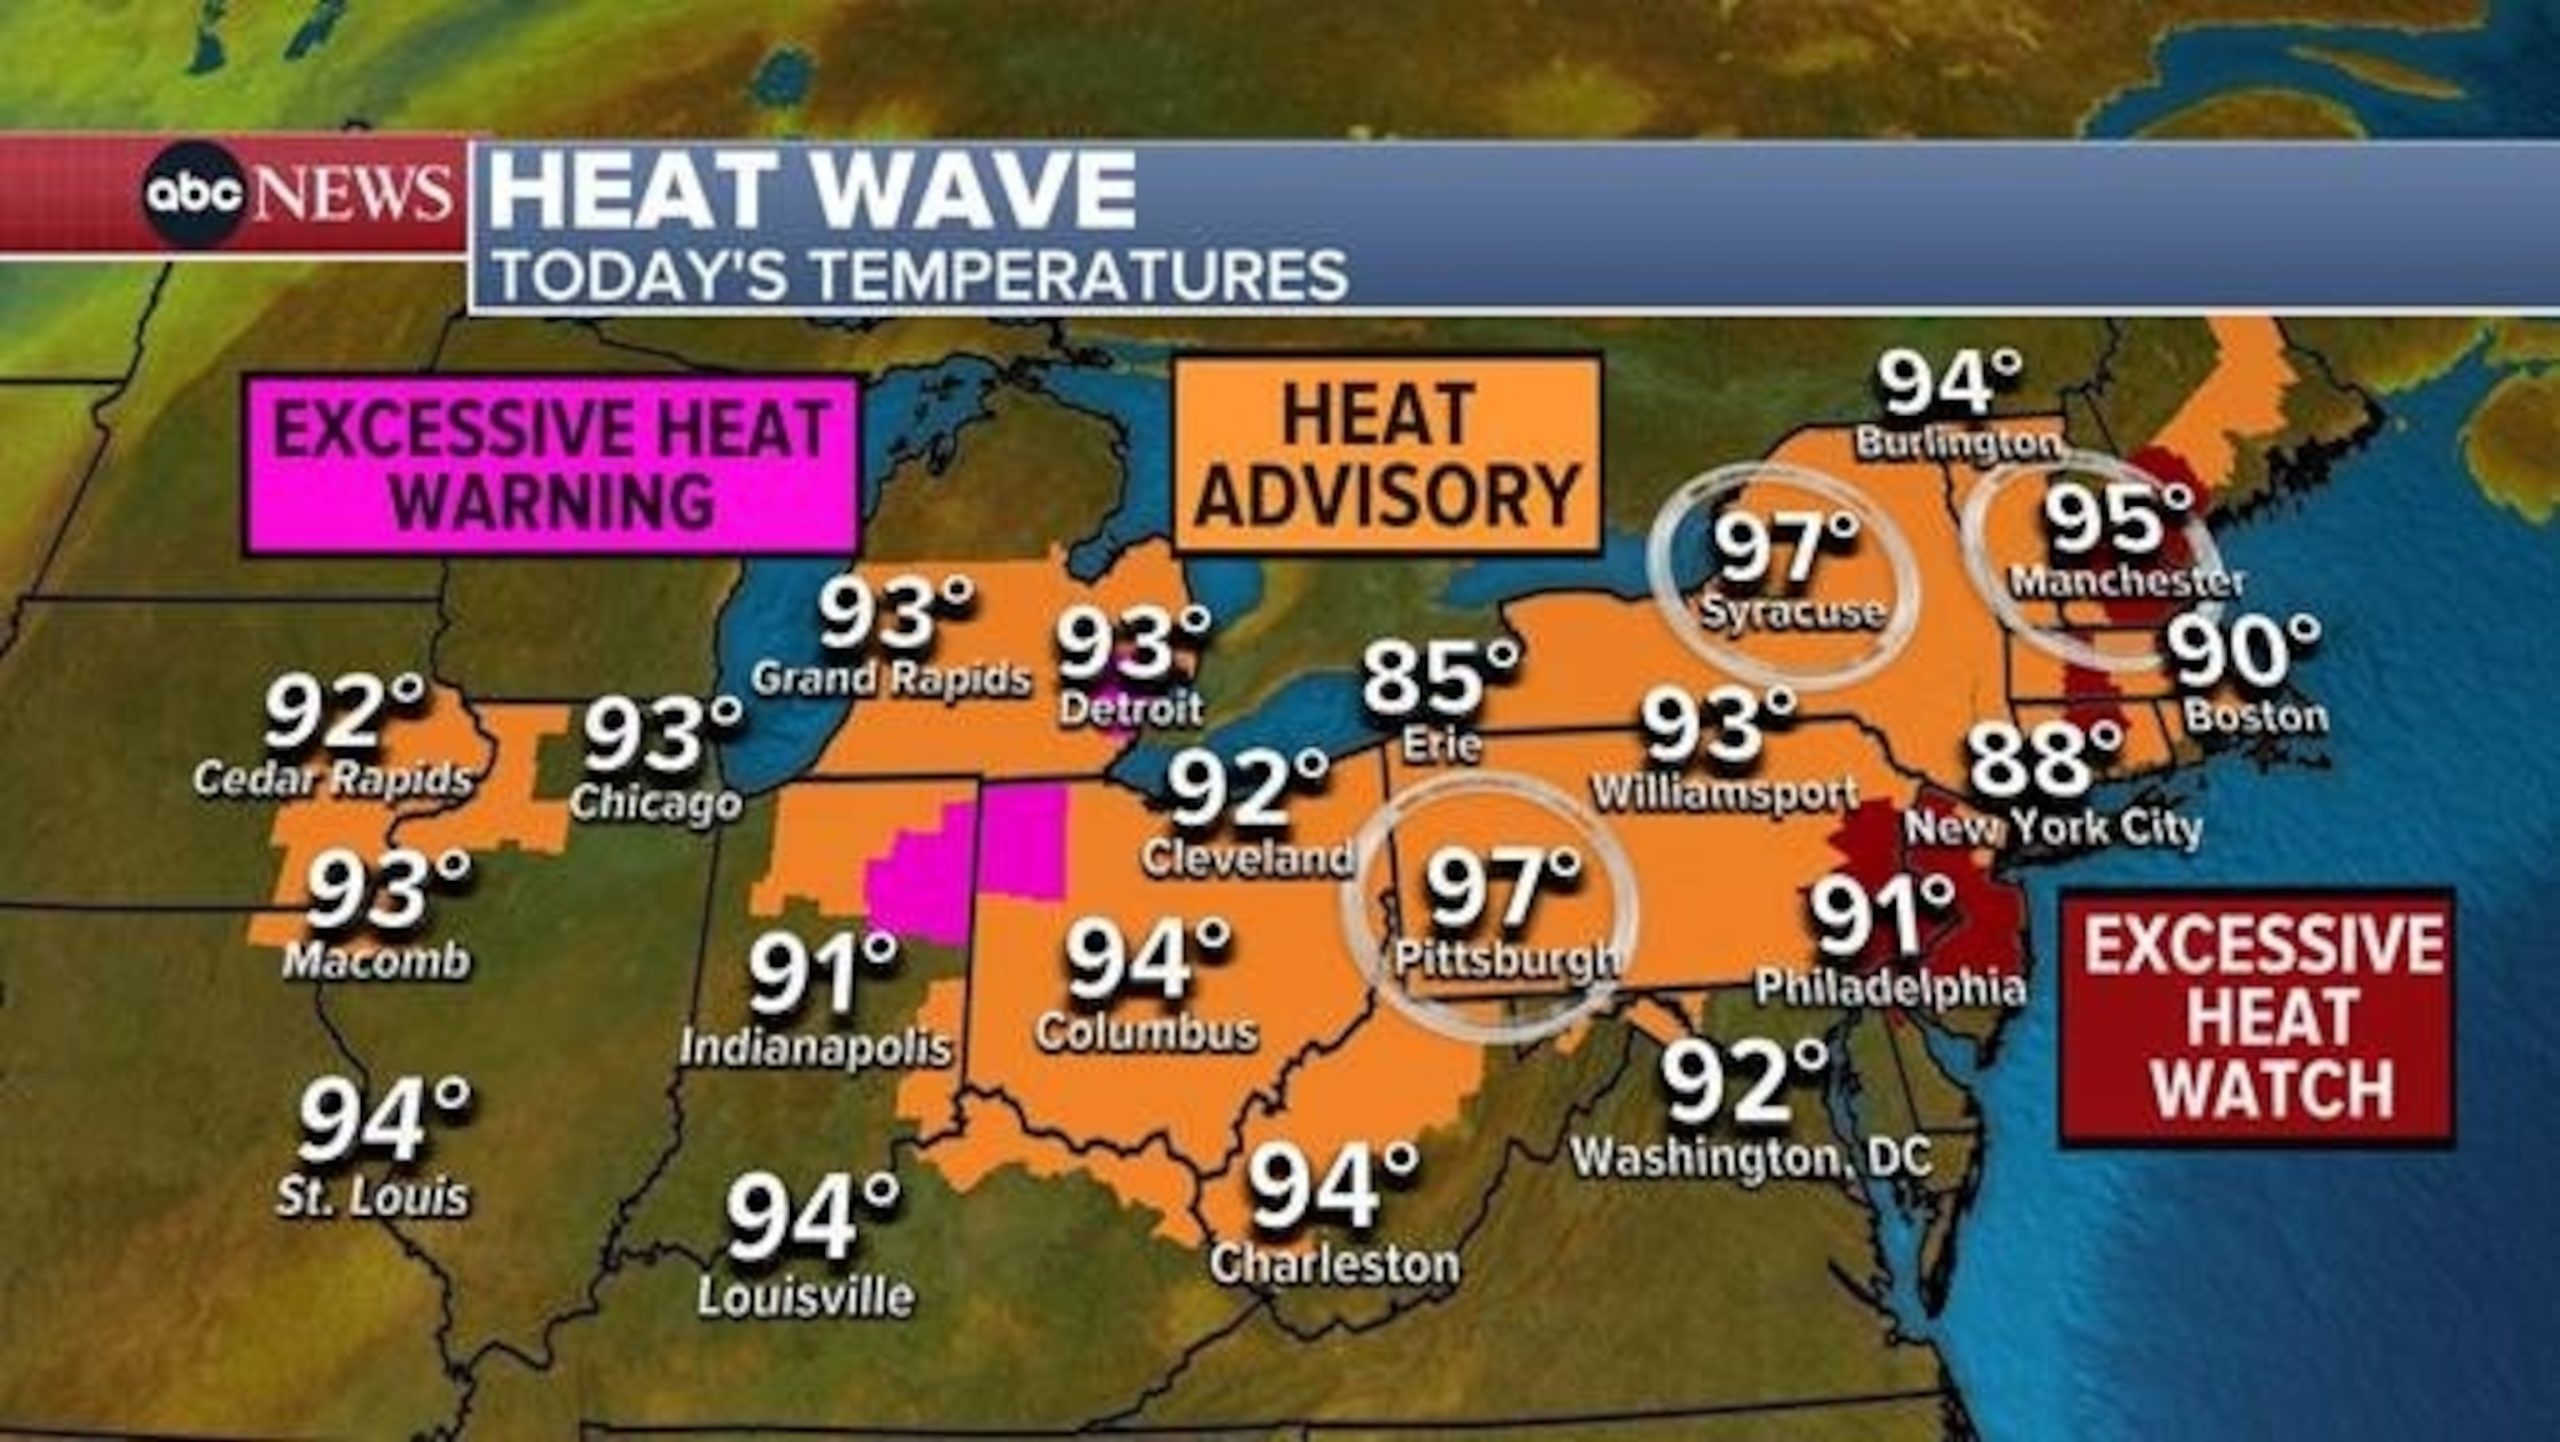 Latest maps and temperatures of dangerous heat wave affecting New York to Chicago